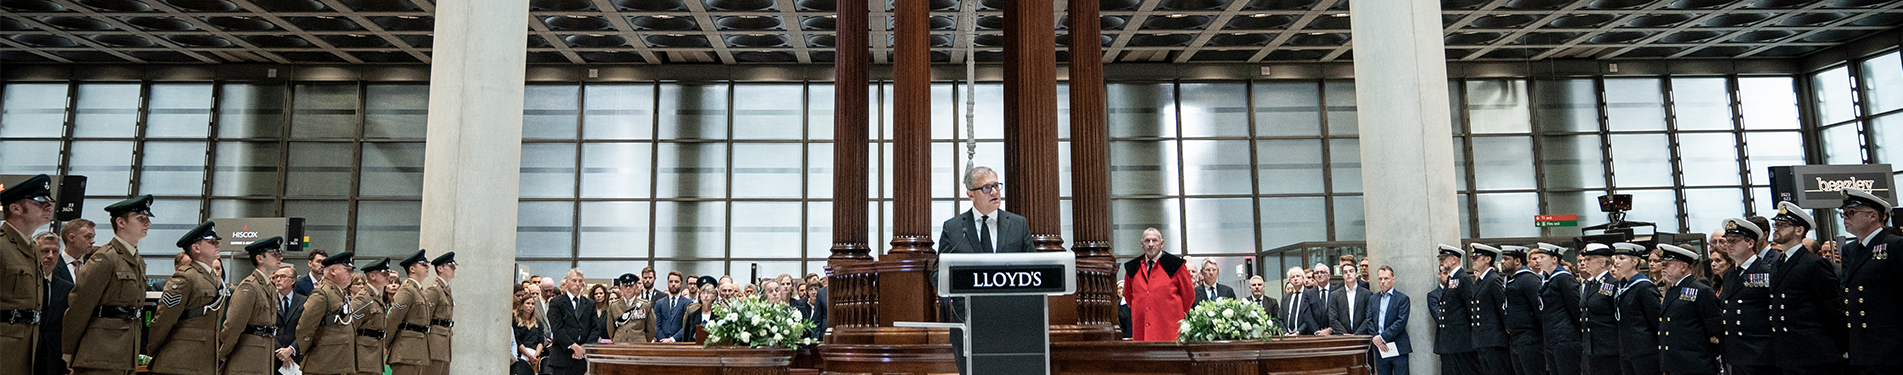 The Lloyd's Chairman addressing the Underwriting Room